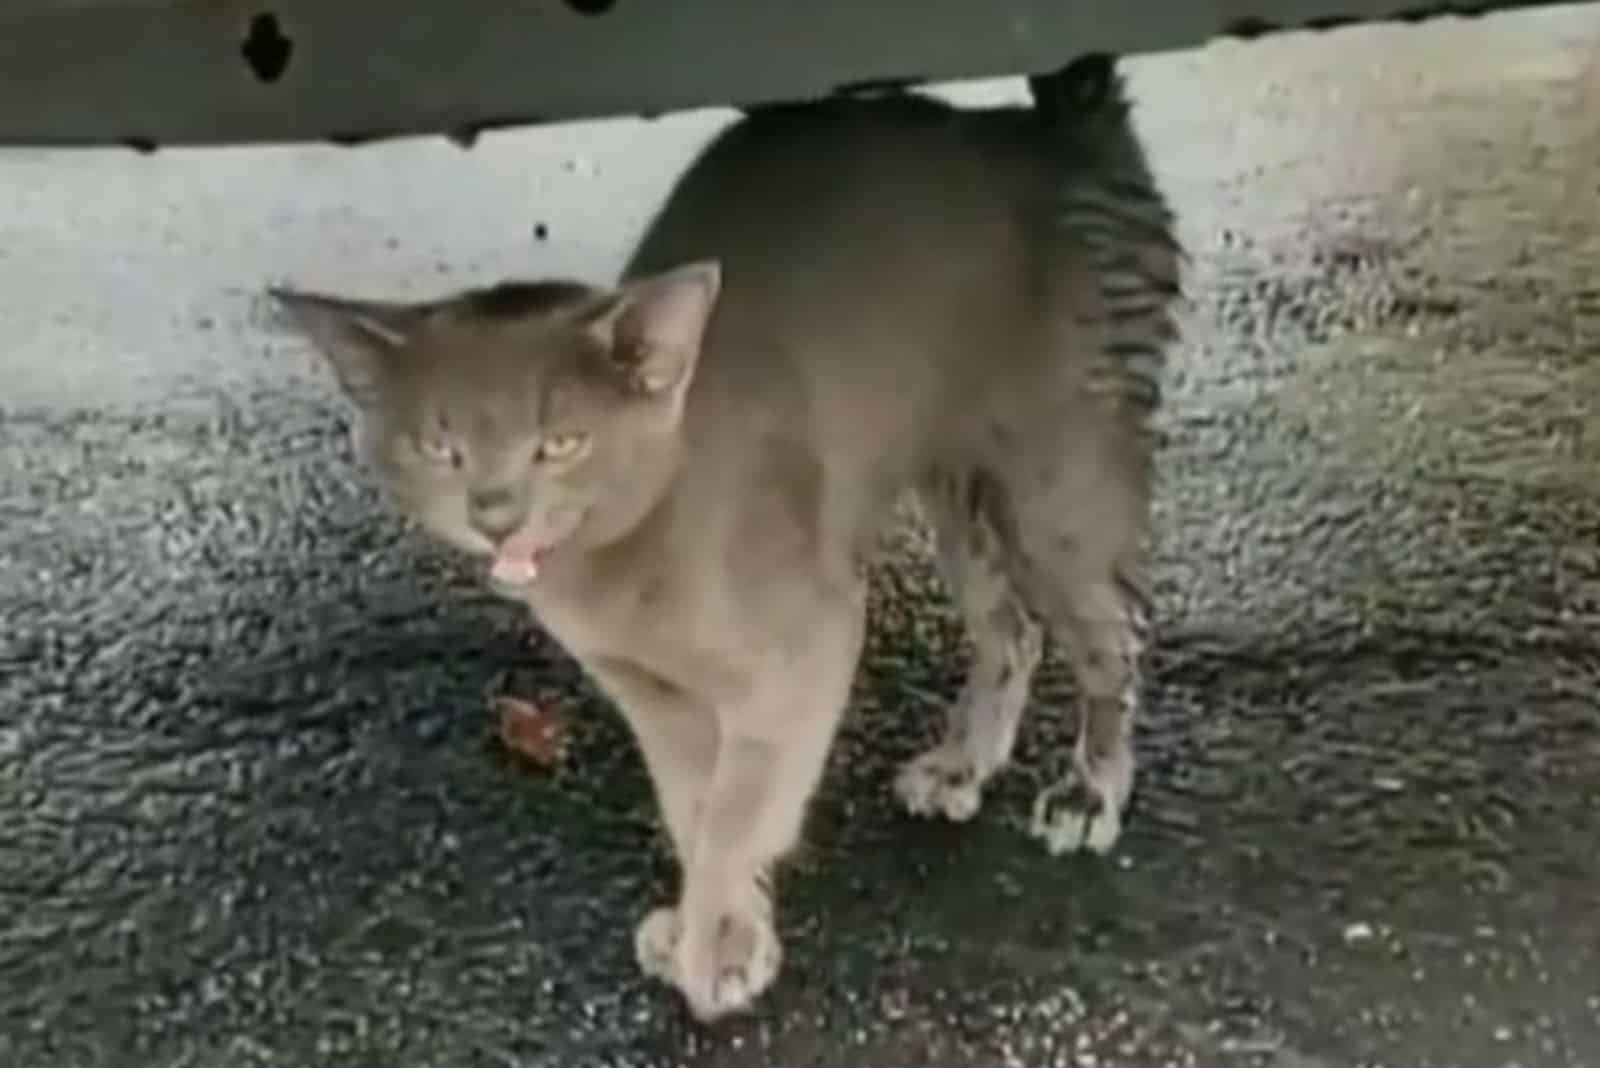 the gray kitten is hiding under the car